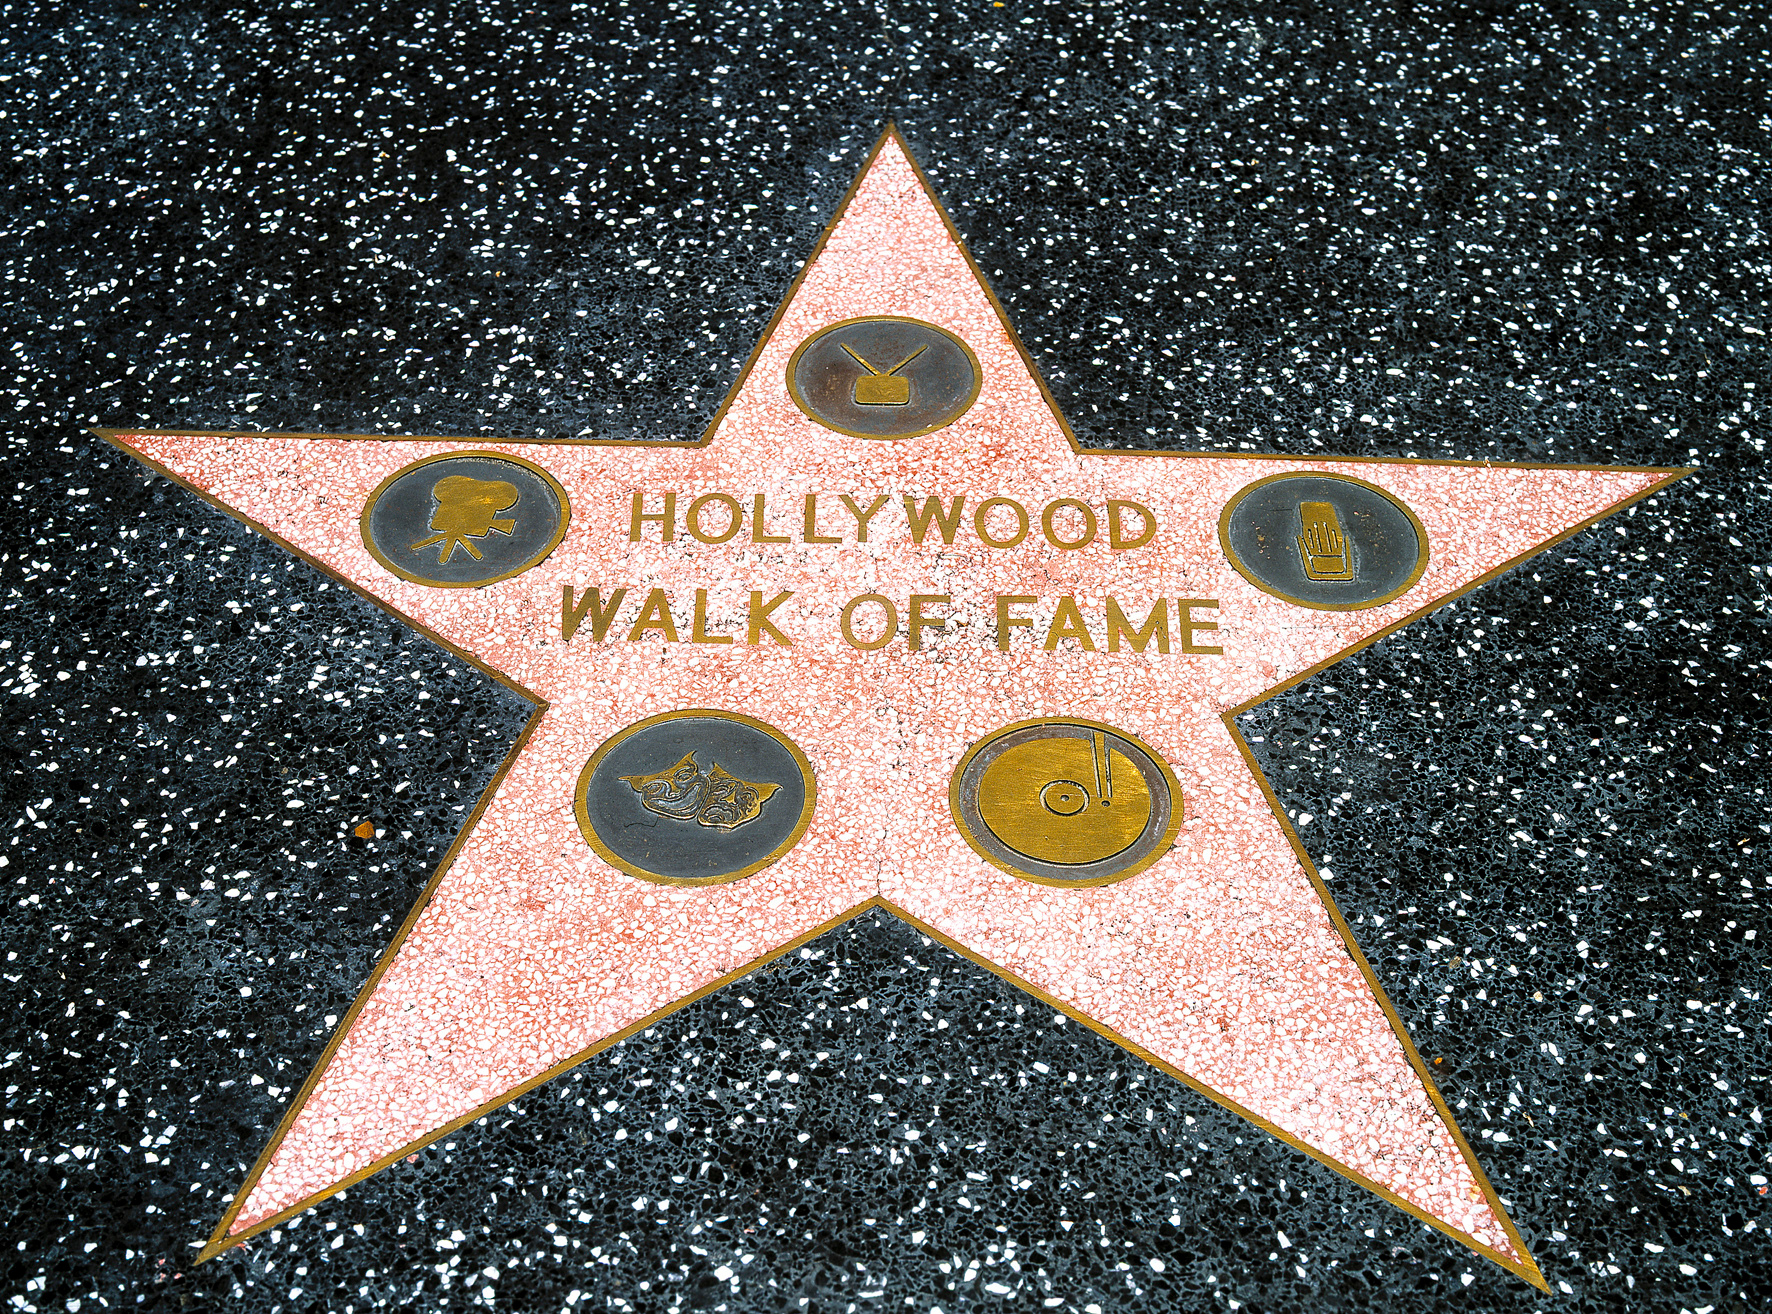 Disappointing Tourist Destinations - Hollywood walk of fame.